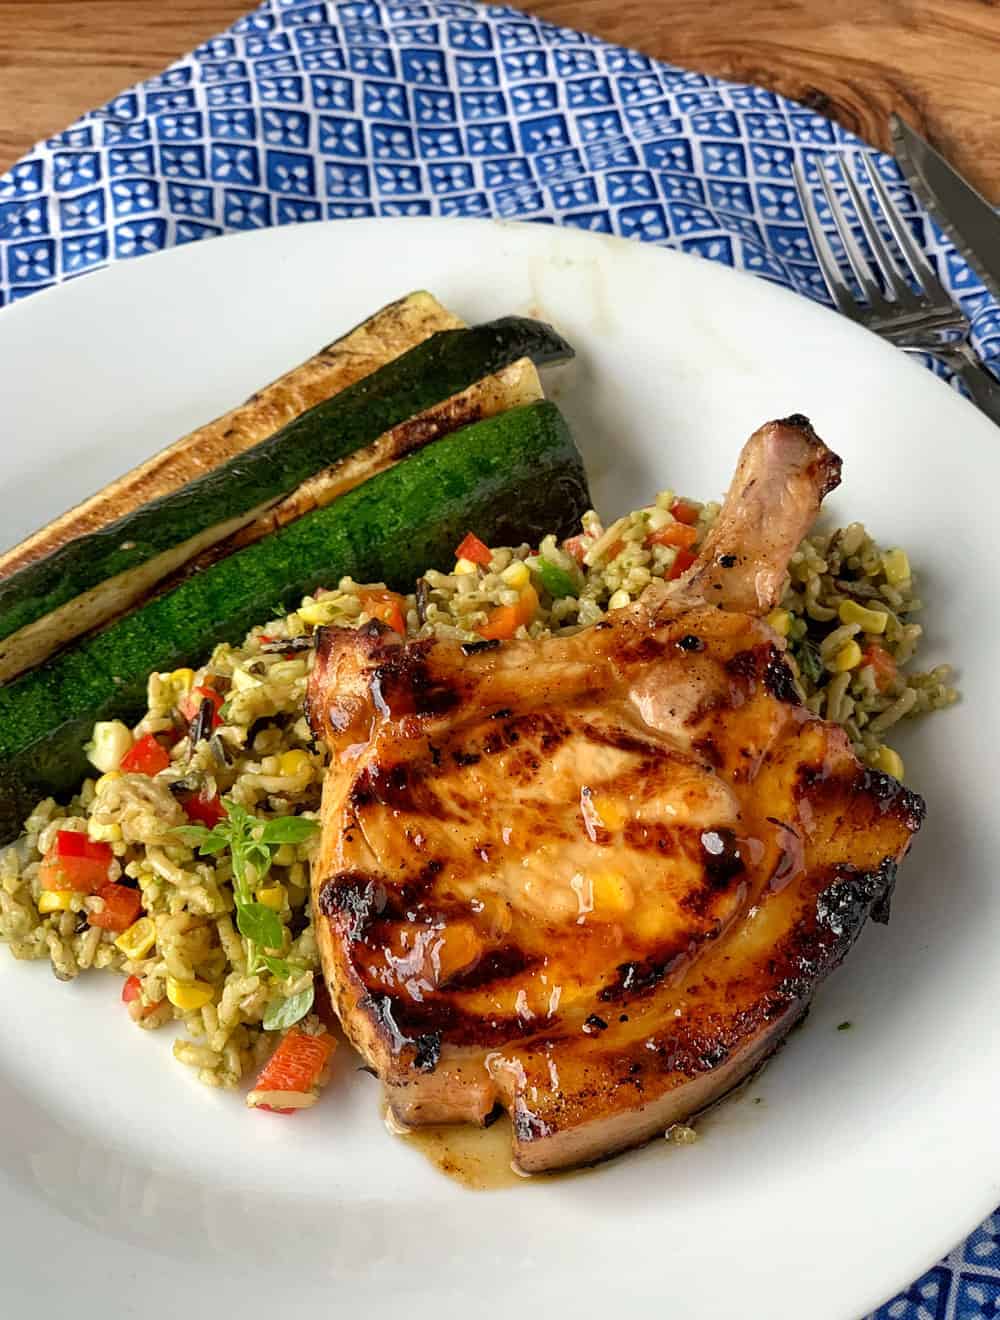 Apricot pork chops with rice salad